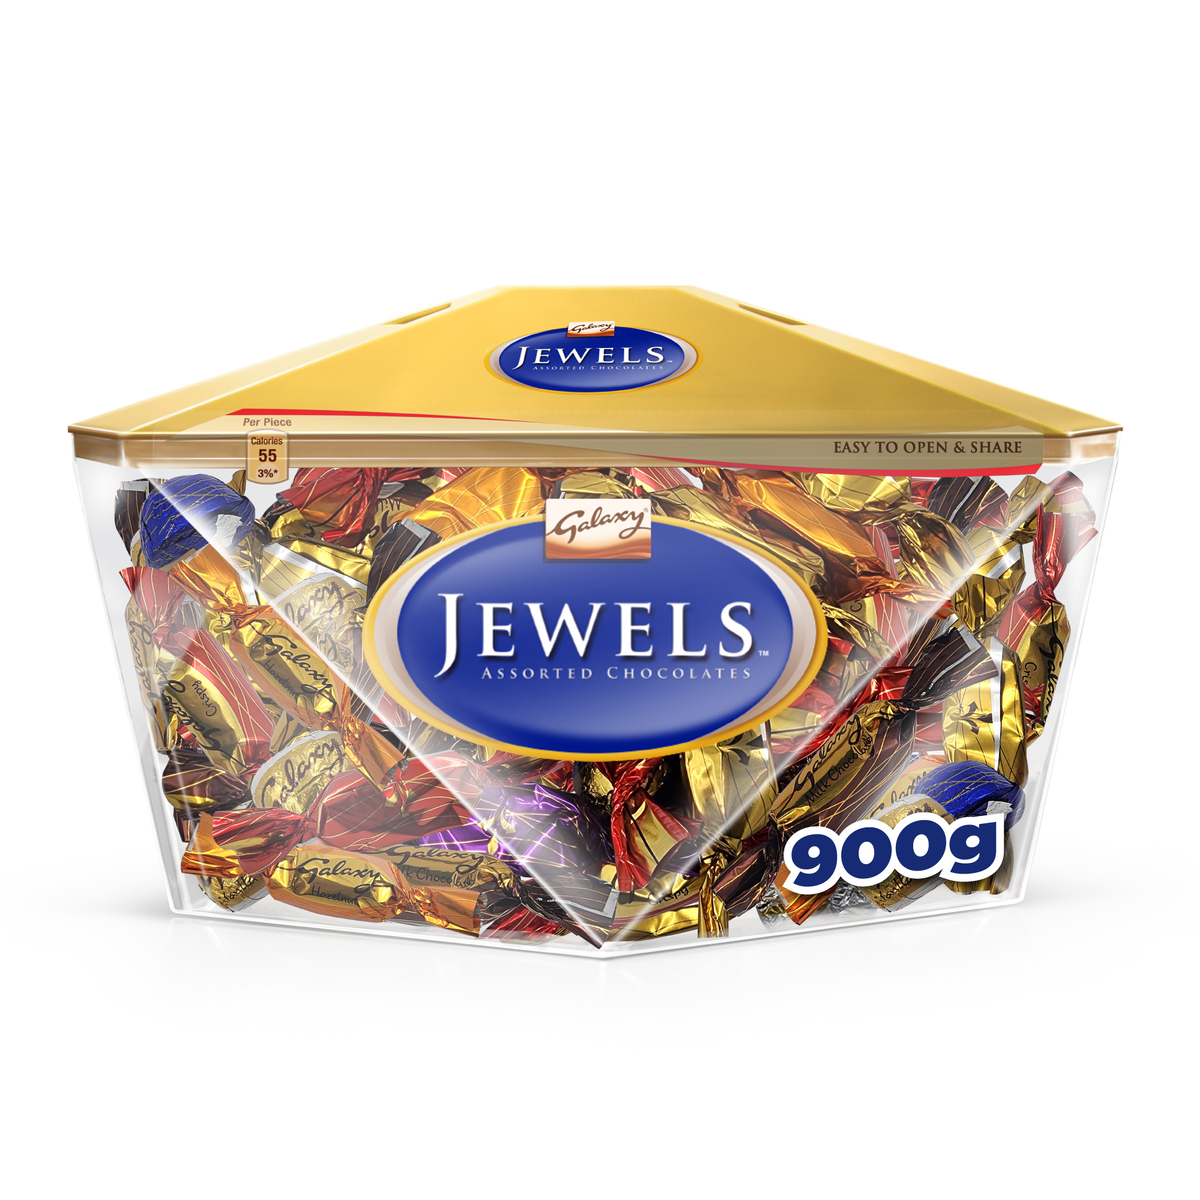 Buy Galaxy Jewels Assortment Chocolate Gift Box 900 g Online at Best Price | Boxed Chocolate | Lulu Kuwait in UAE